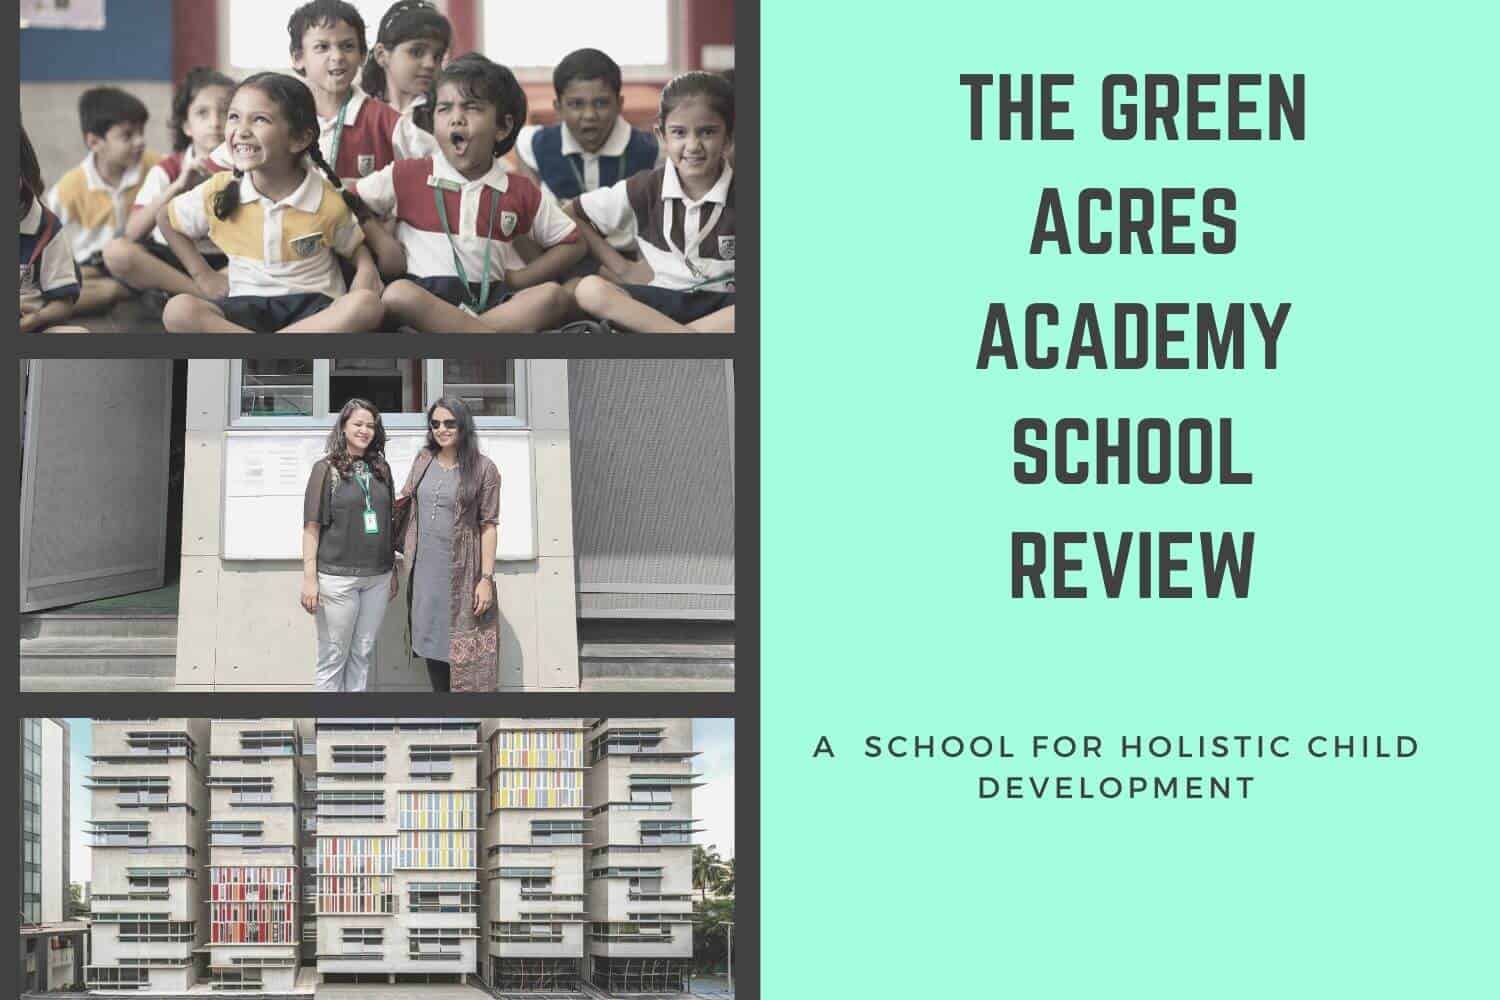 The Green Acres Academy School Review